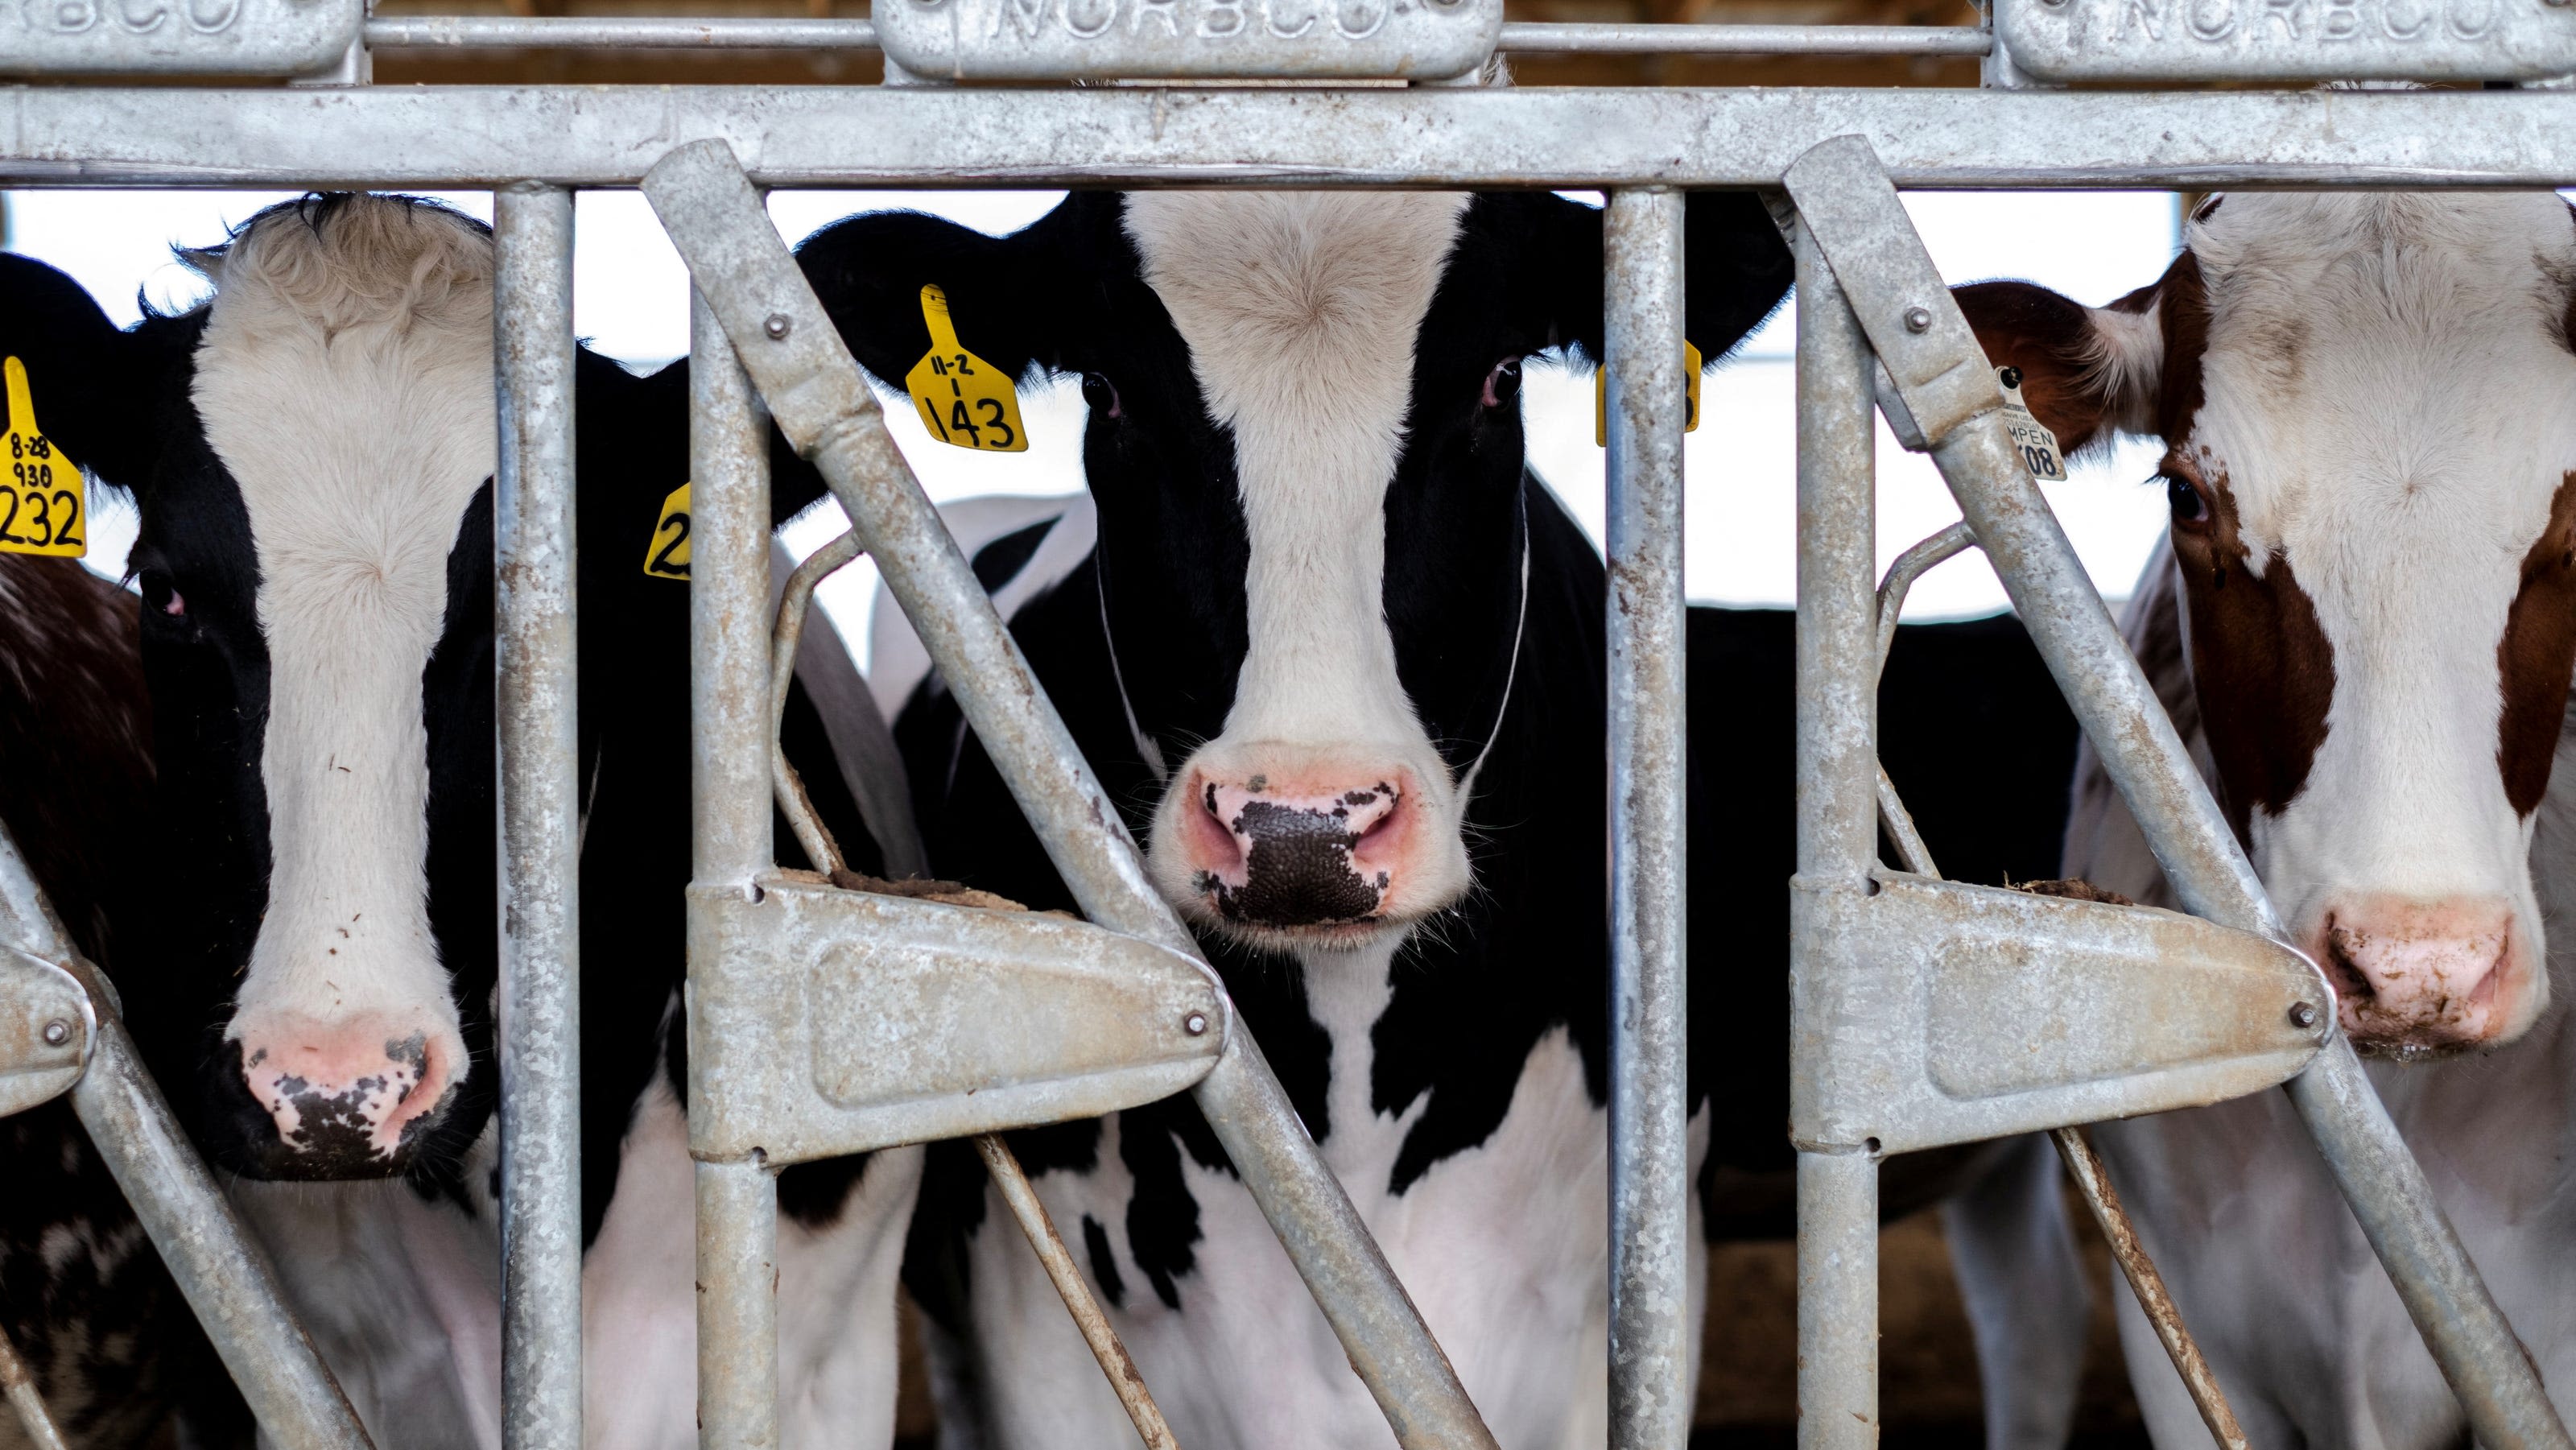 H5N1 bird flu human case confirmed in Michigan dairy worker: What to know about risks